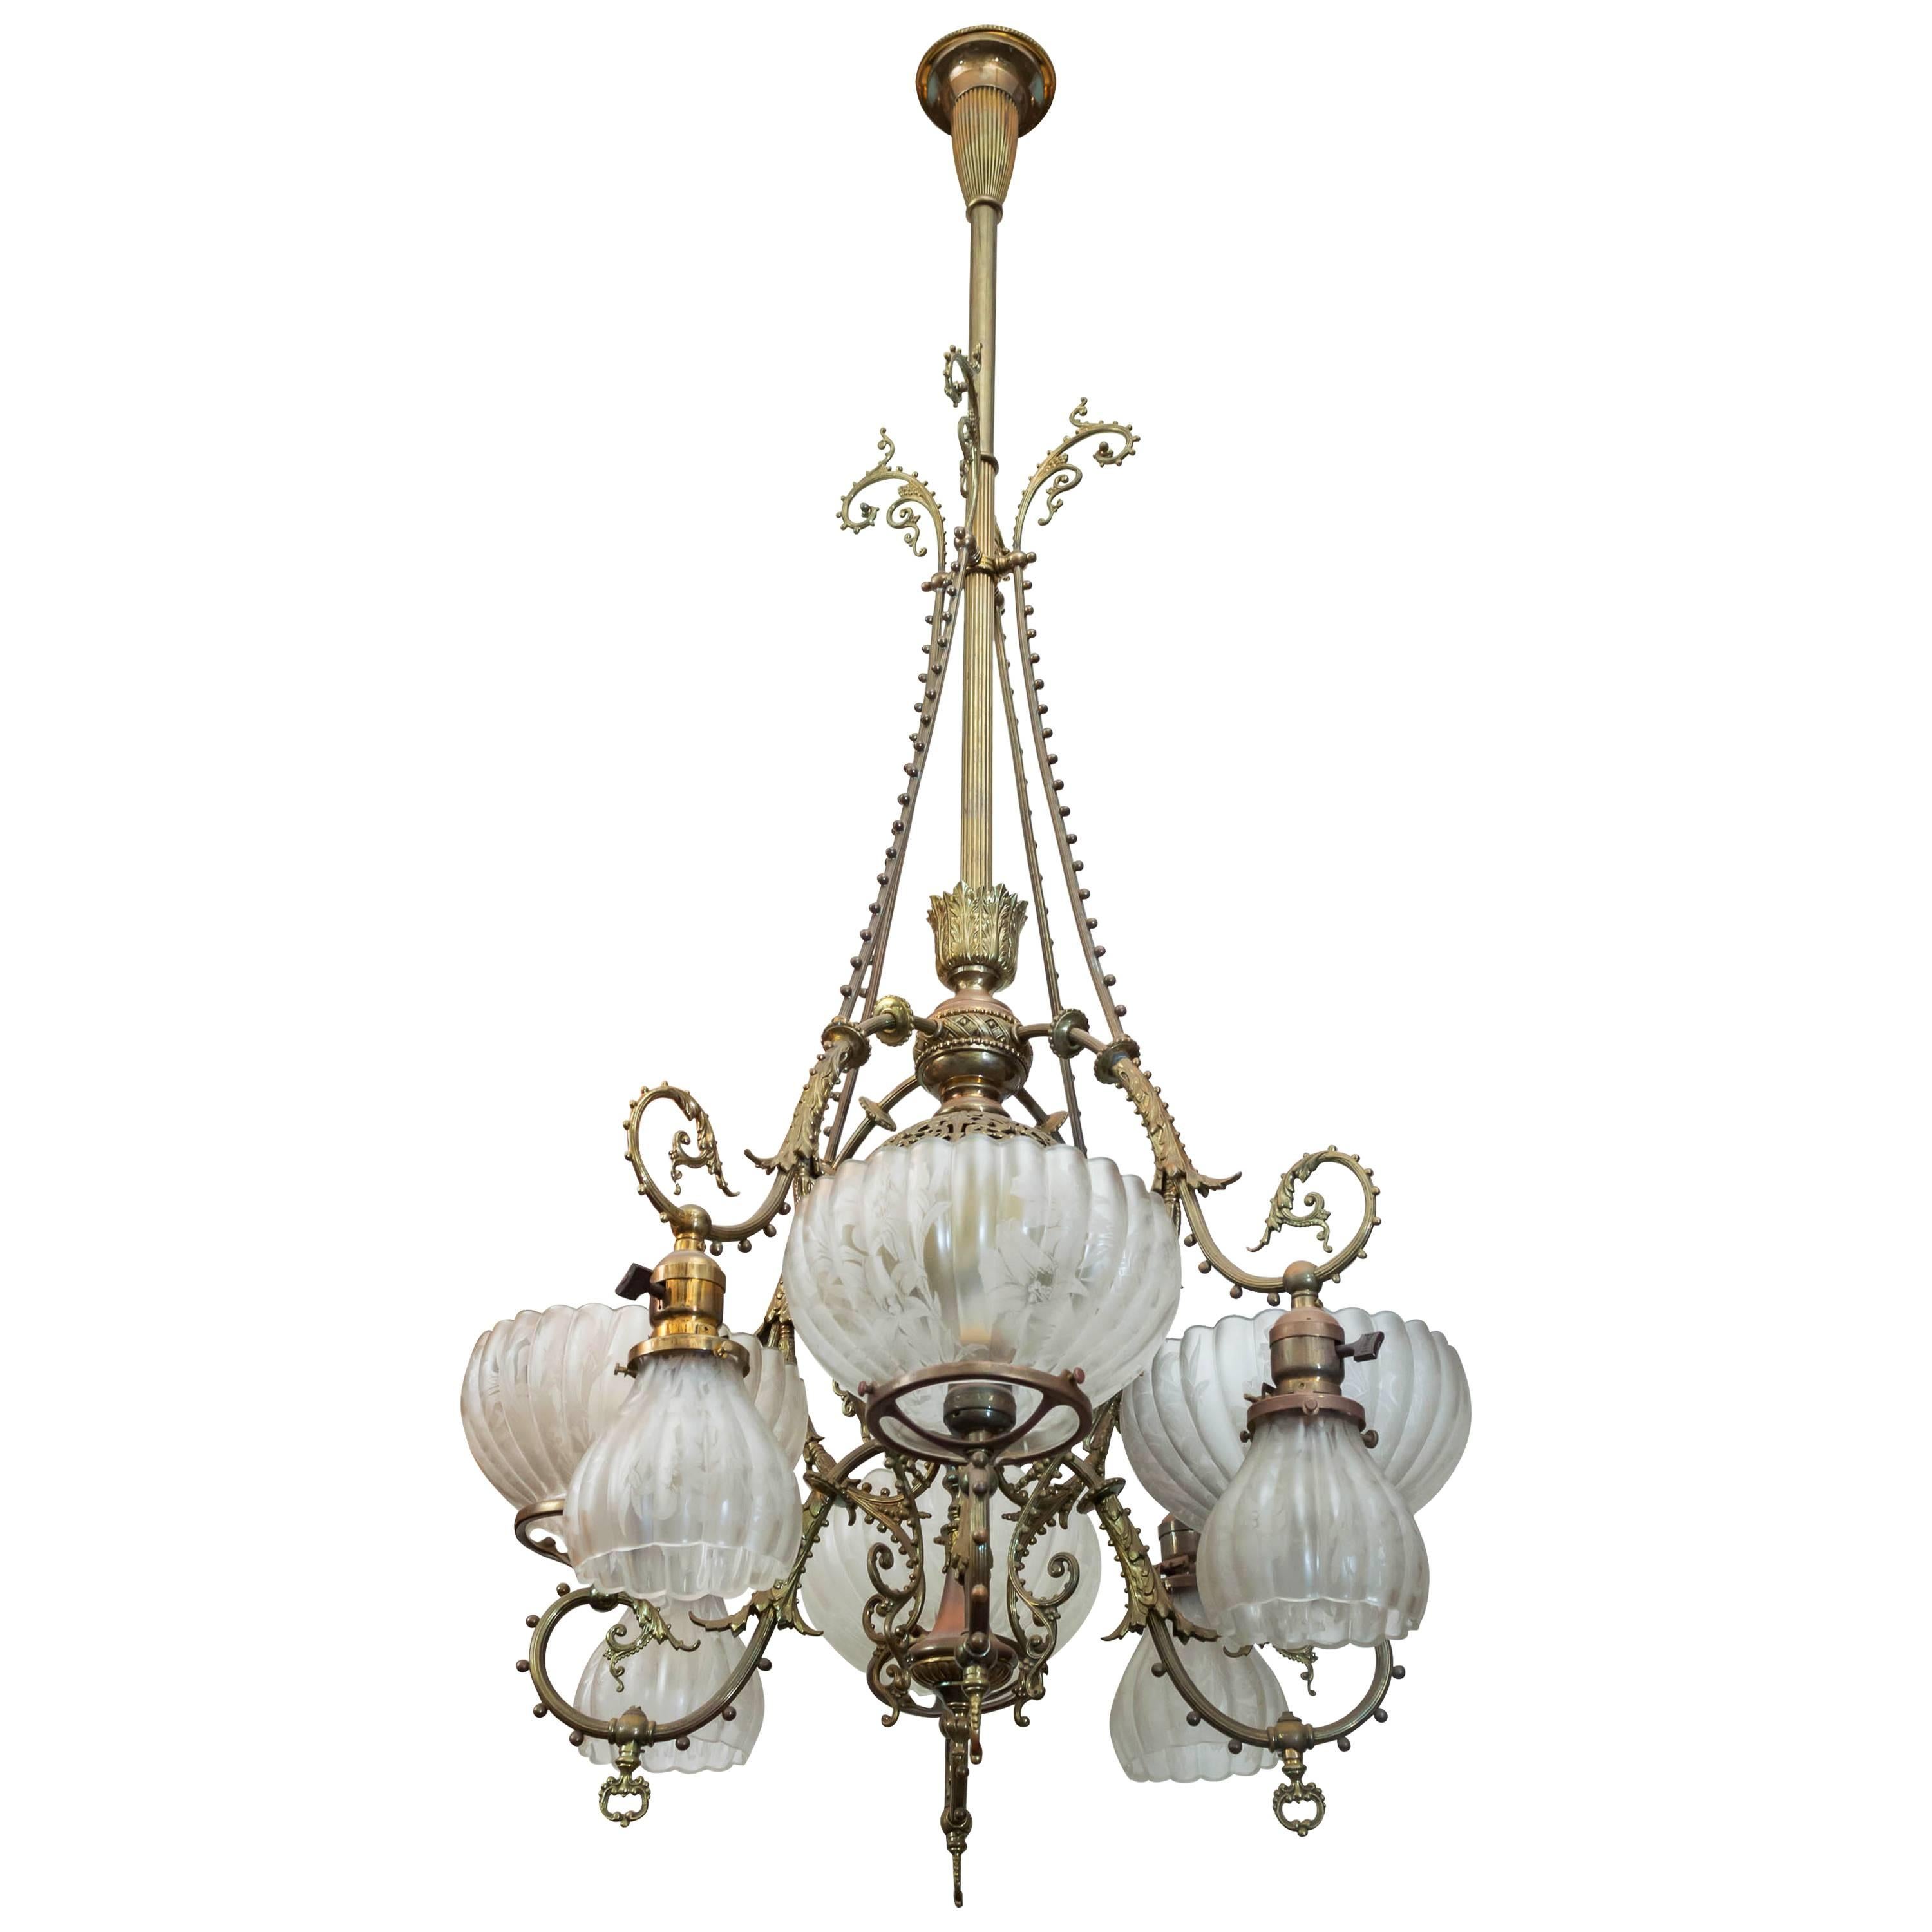 Late Victorian Aesthetic Eight-Arm Gas and Electric Chandelier